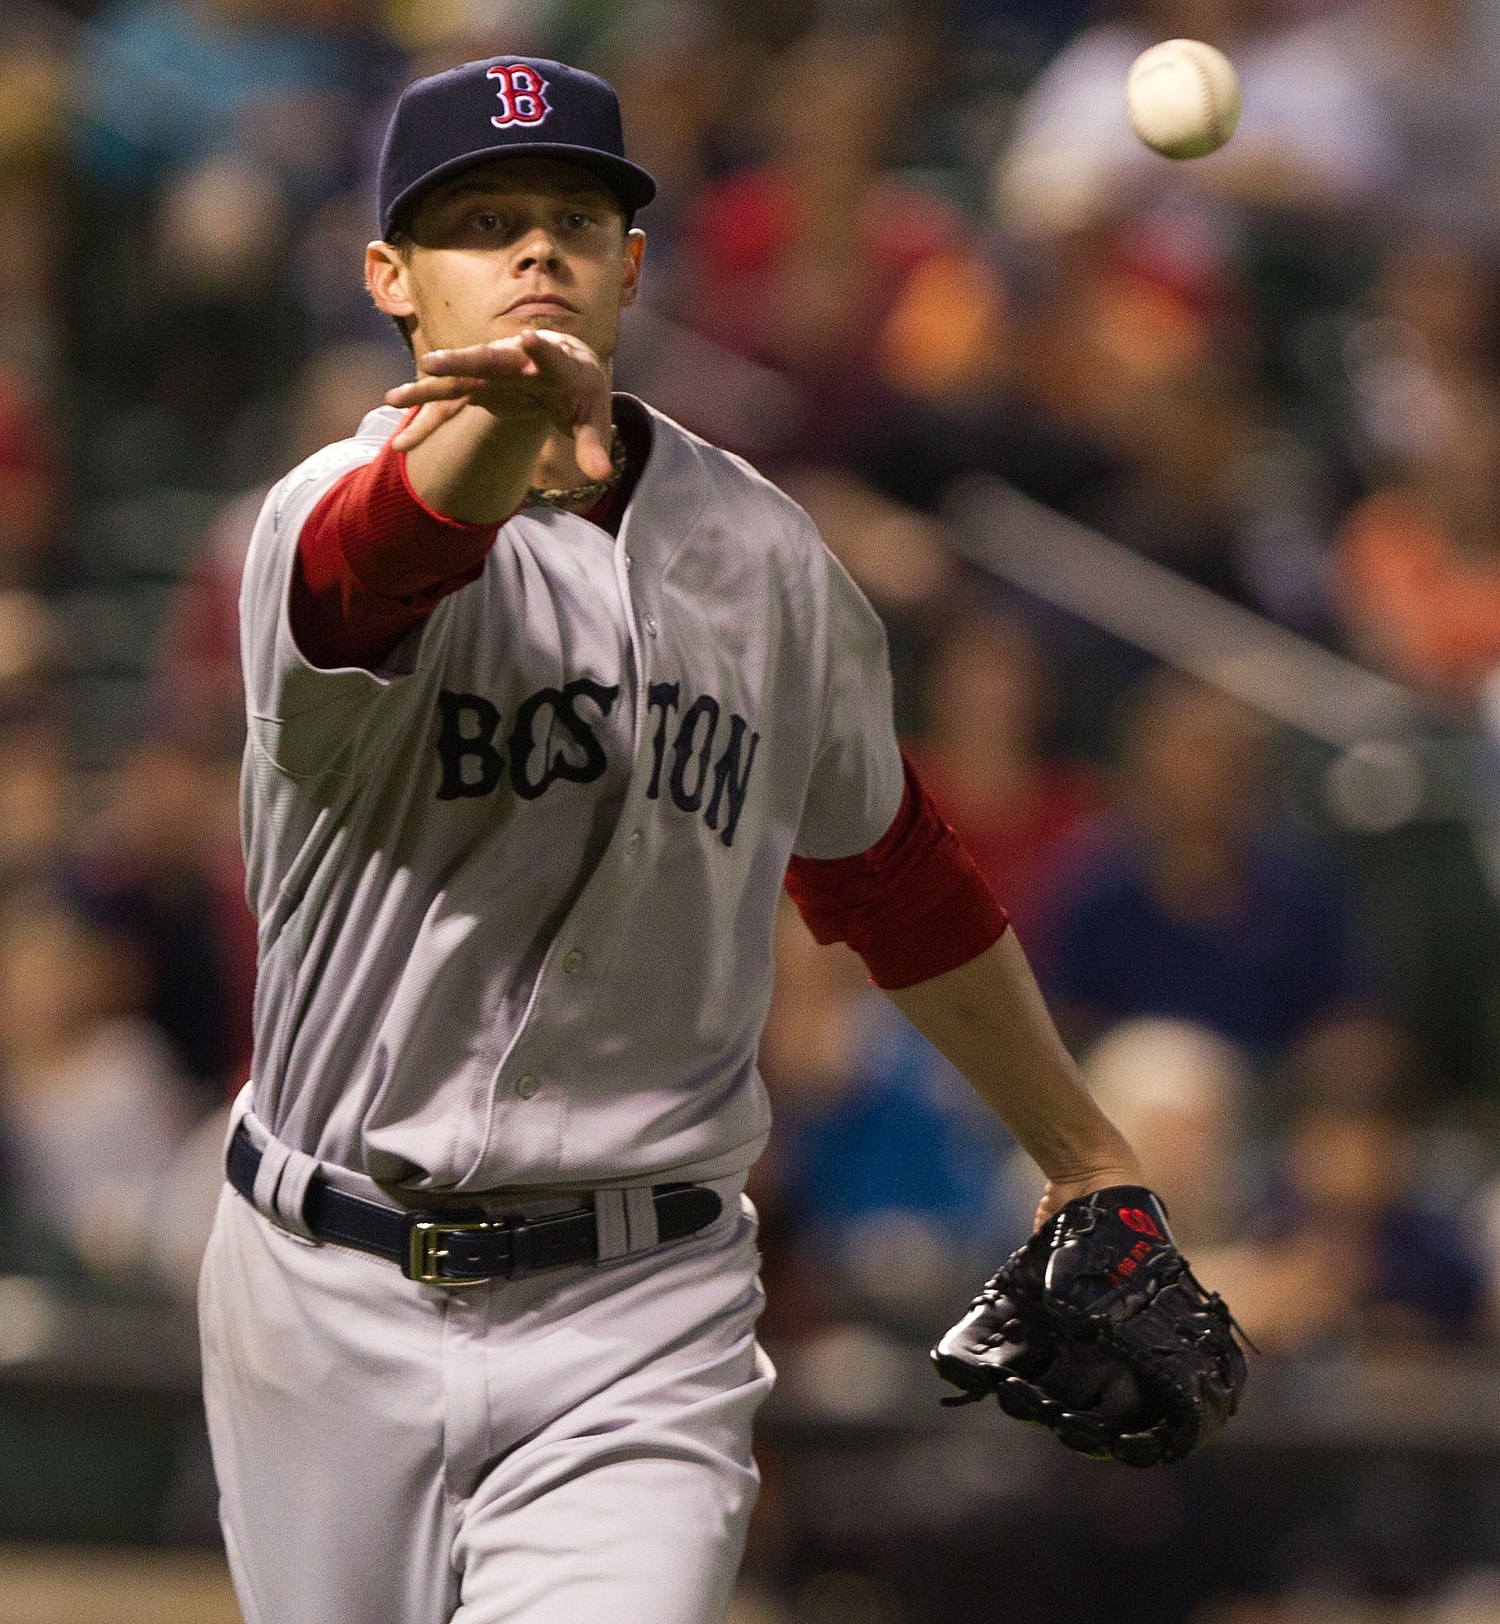 Josh Beckett recalls pitching 2008 ALCS Game 6 as Red Sox needed